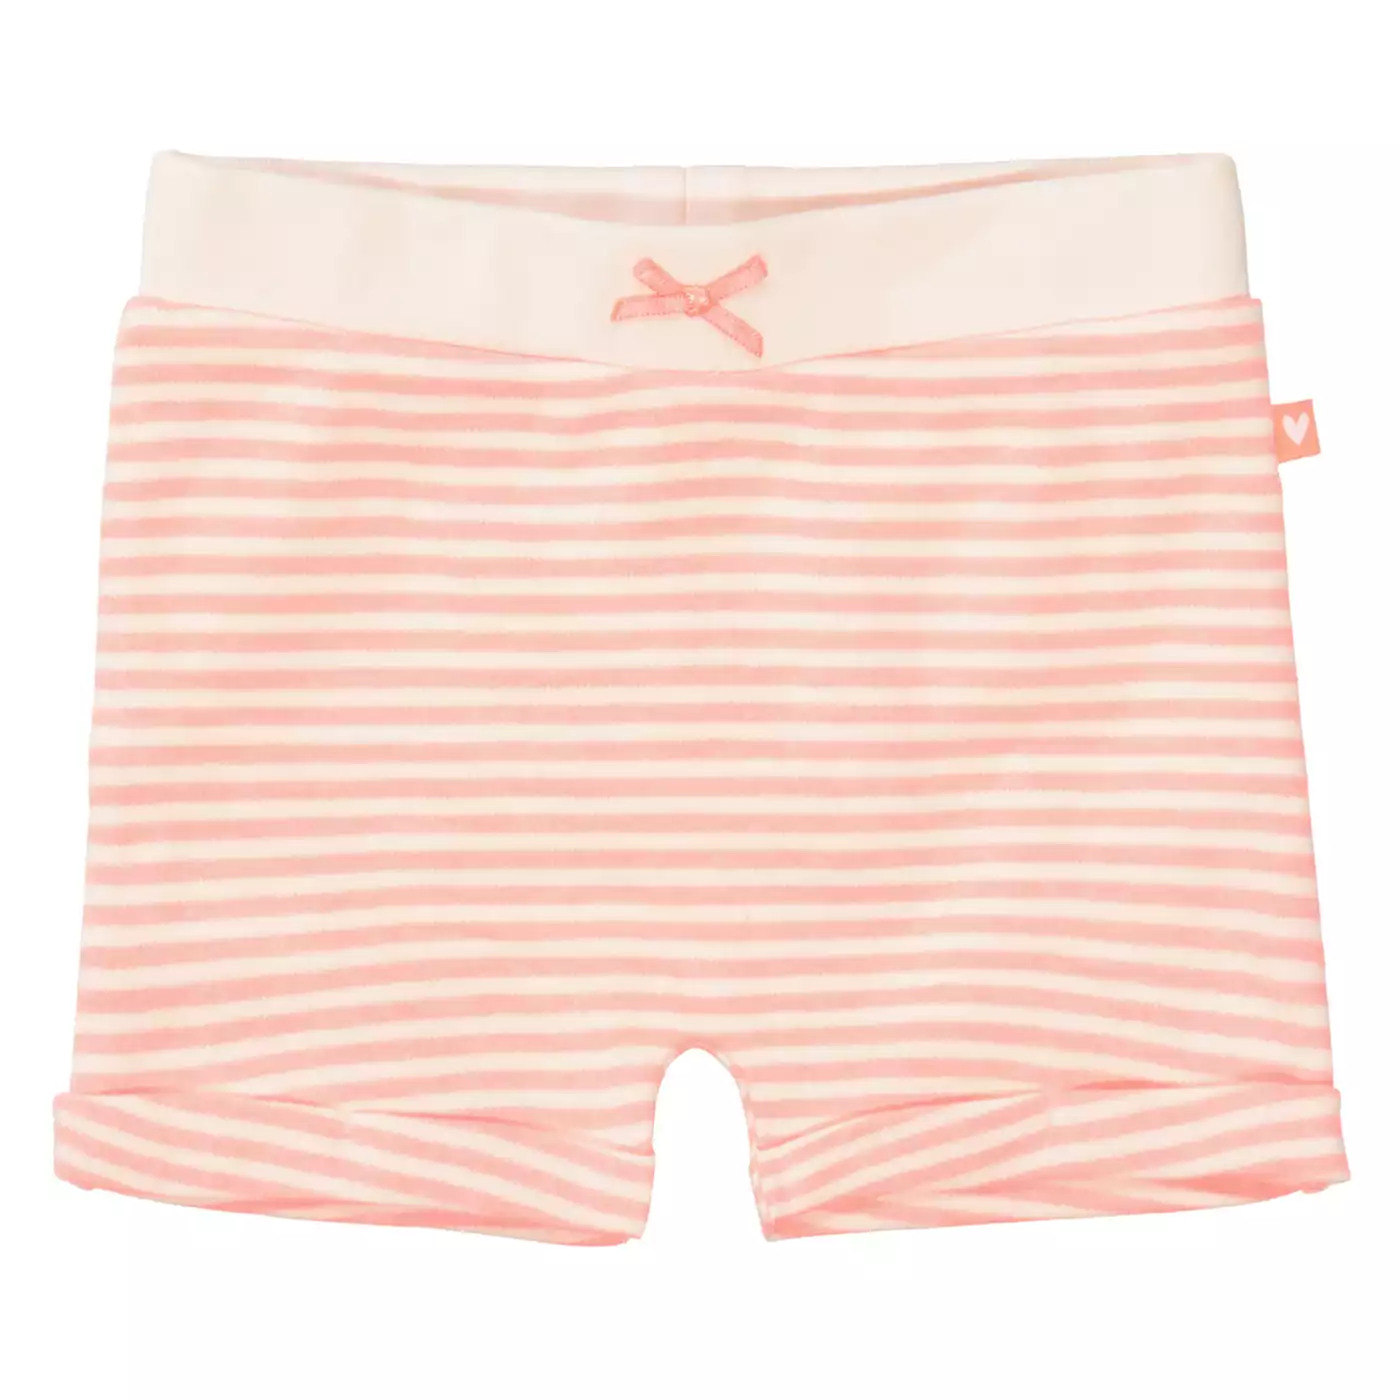 Shorts Neon Coral STACCATO Pink Rosa 2006580296107 1